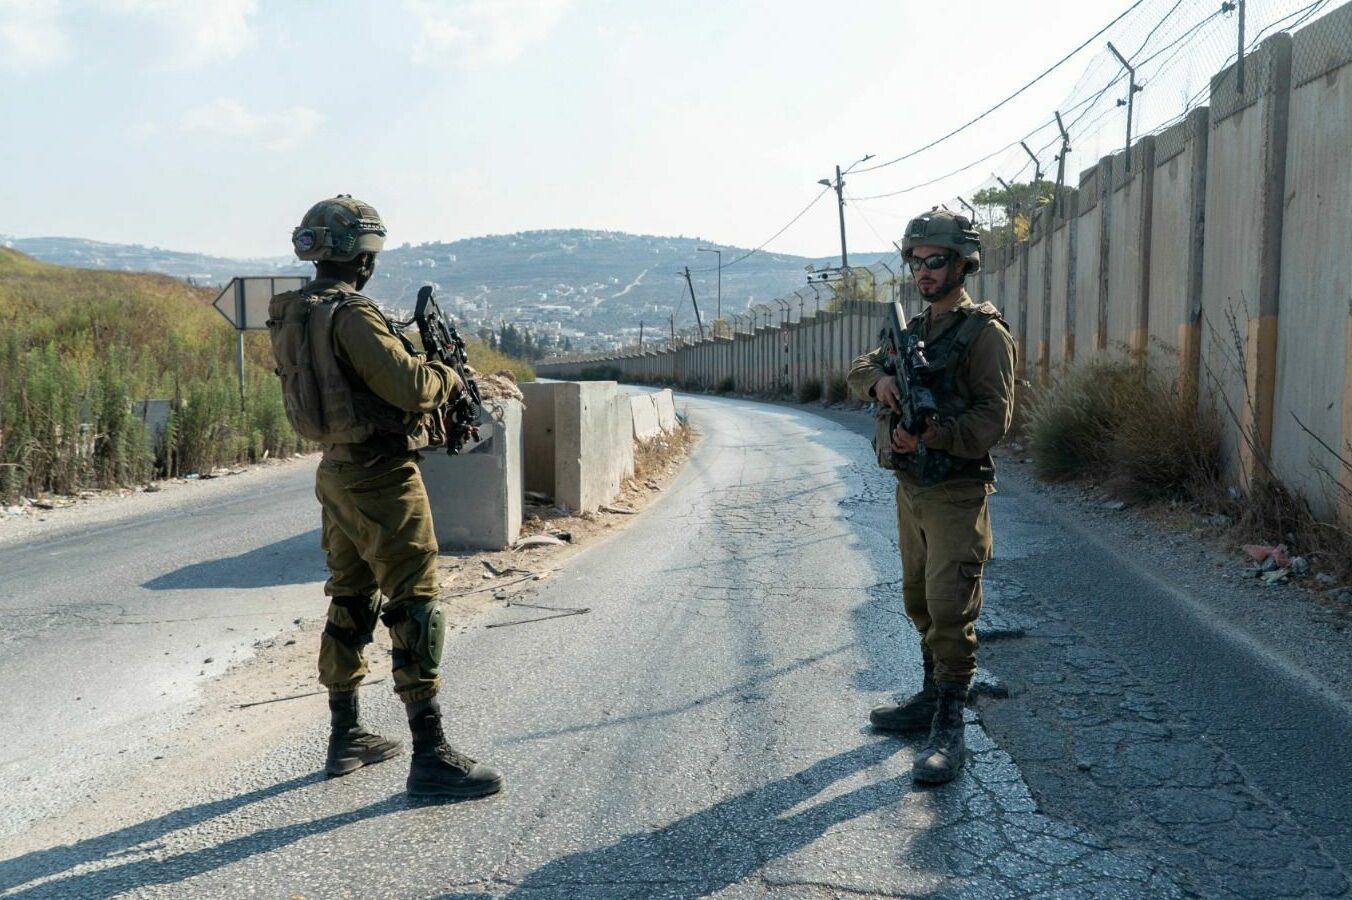 Two Israelis Killed In New West Bank Shooting Attack (Video)